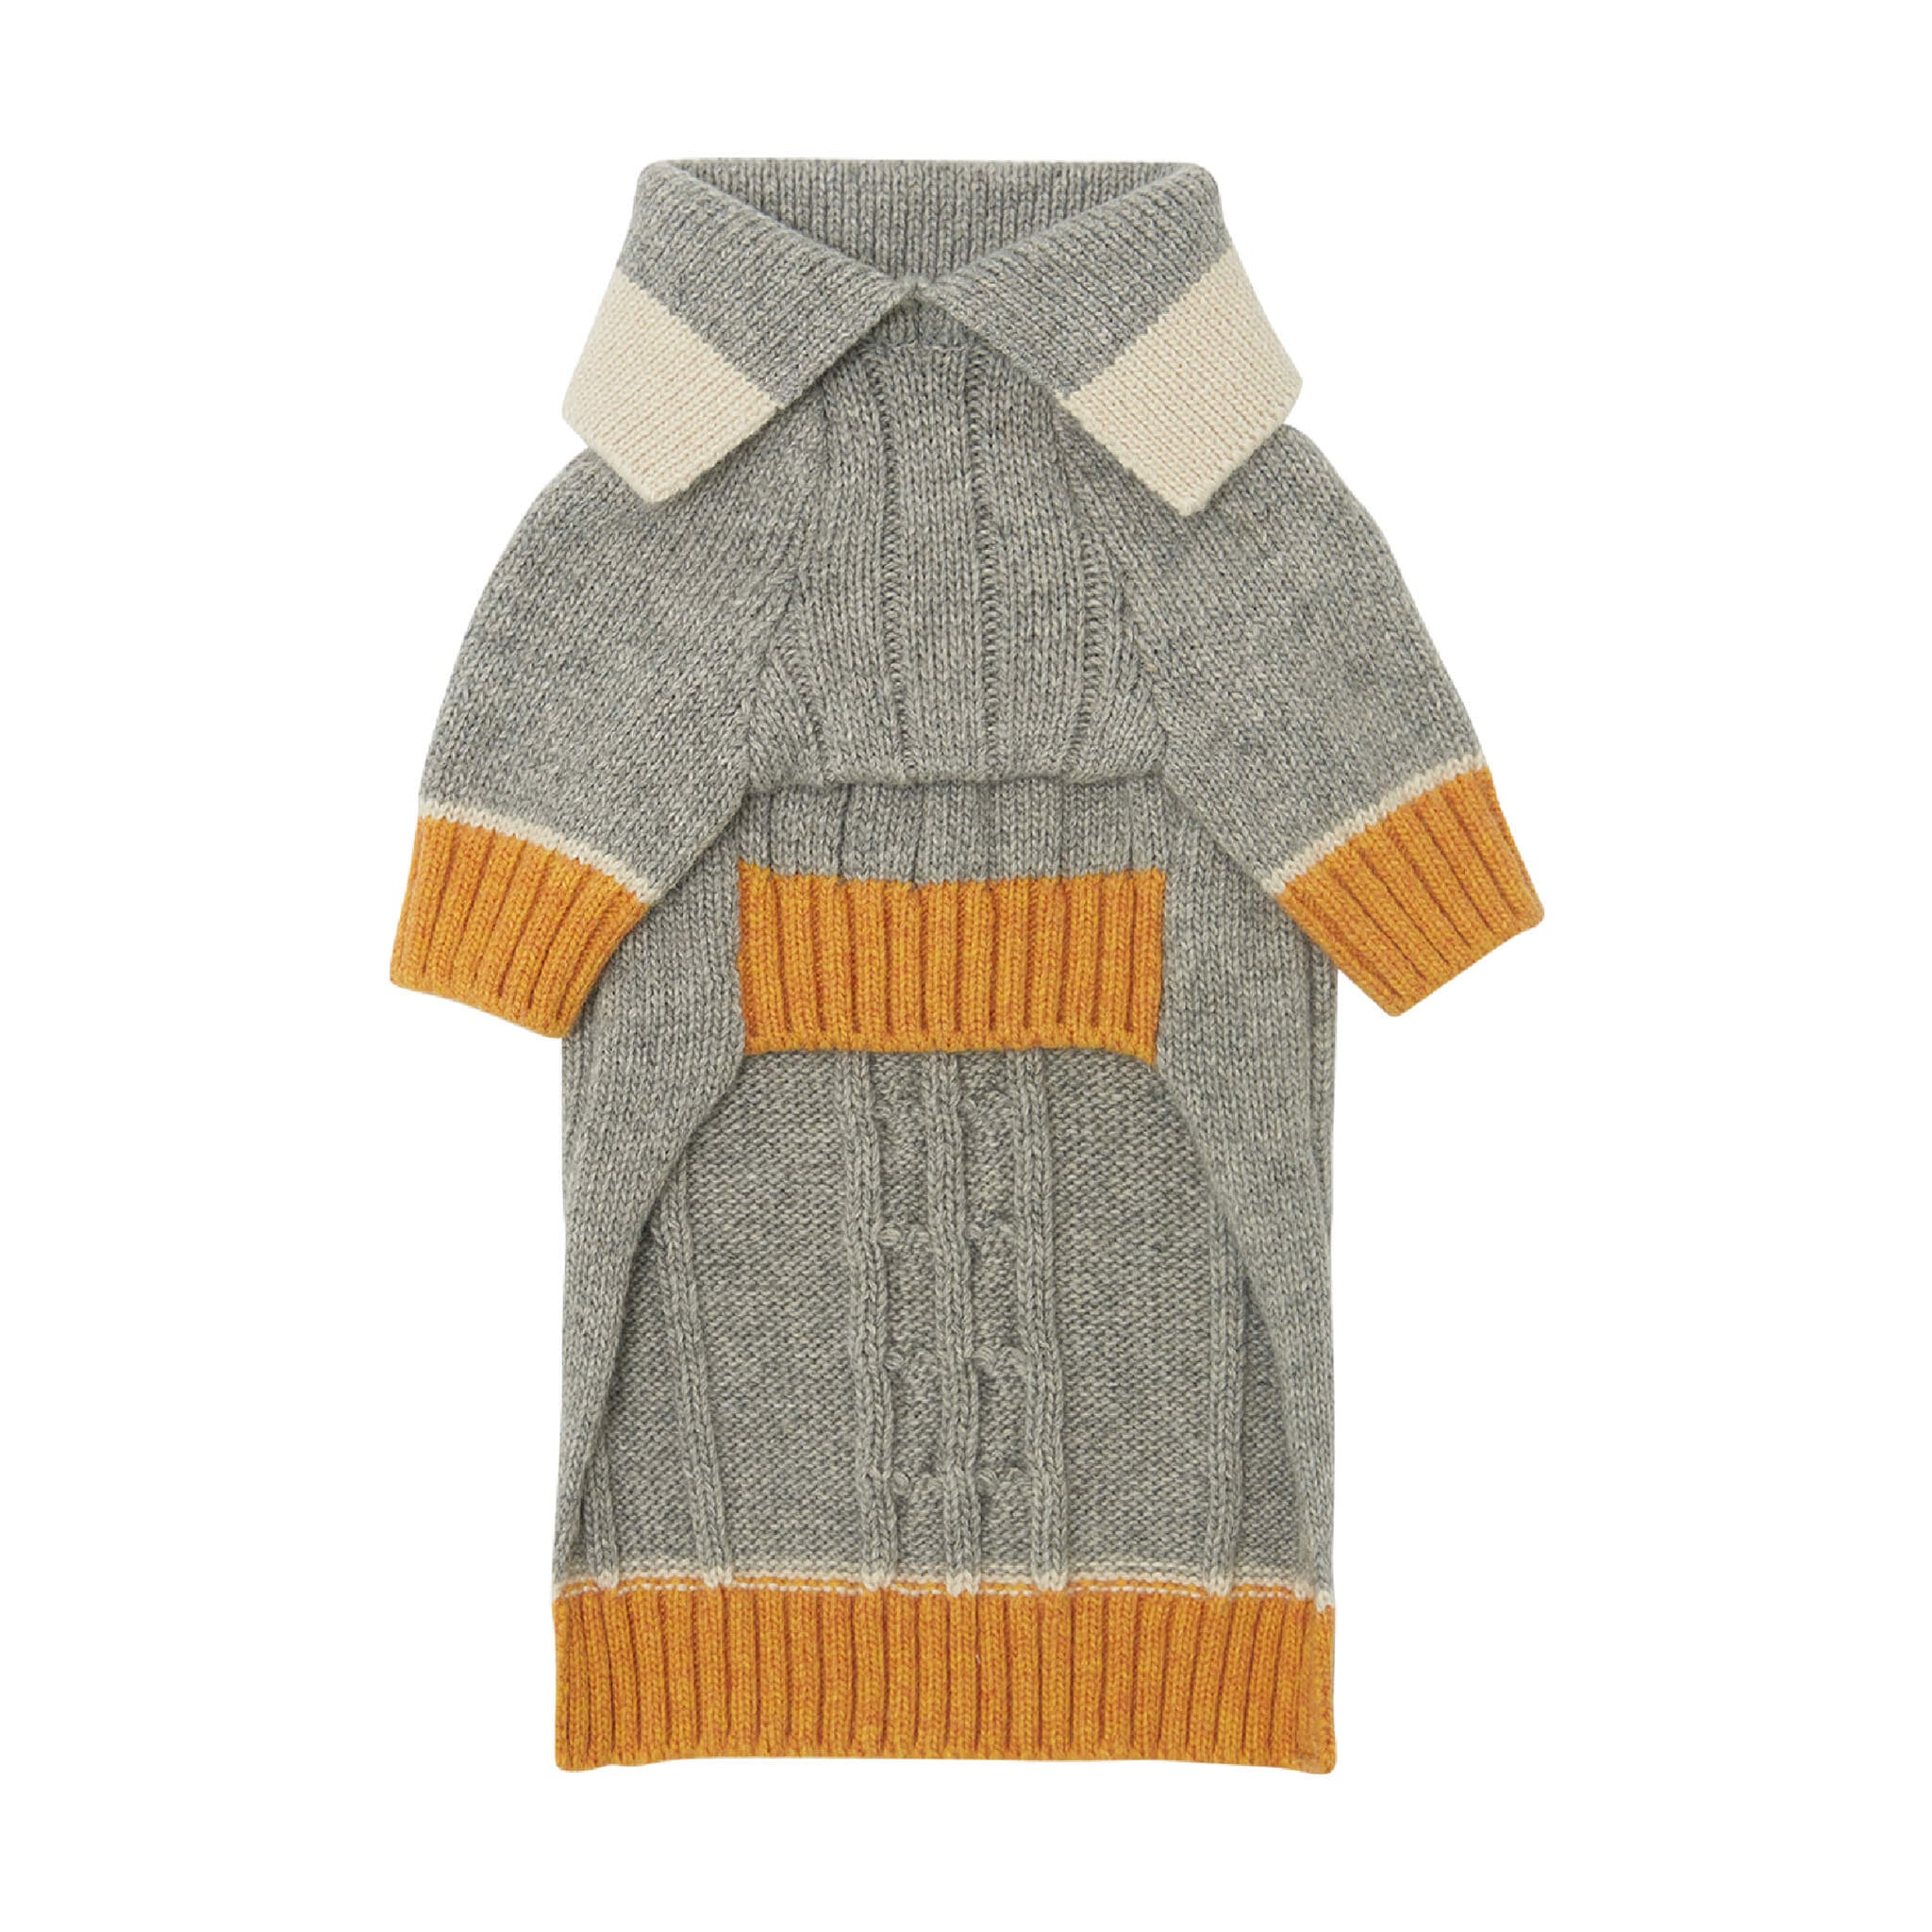 DOKT cashmere knit in grey and yellow.